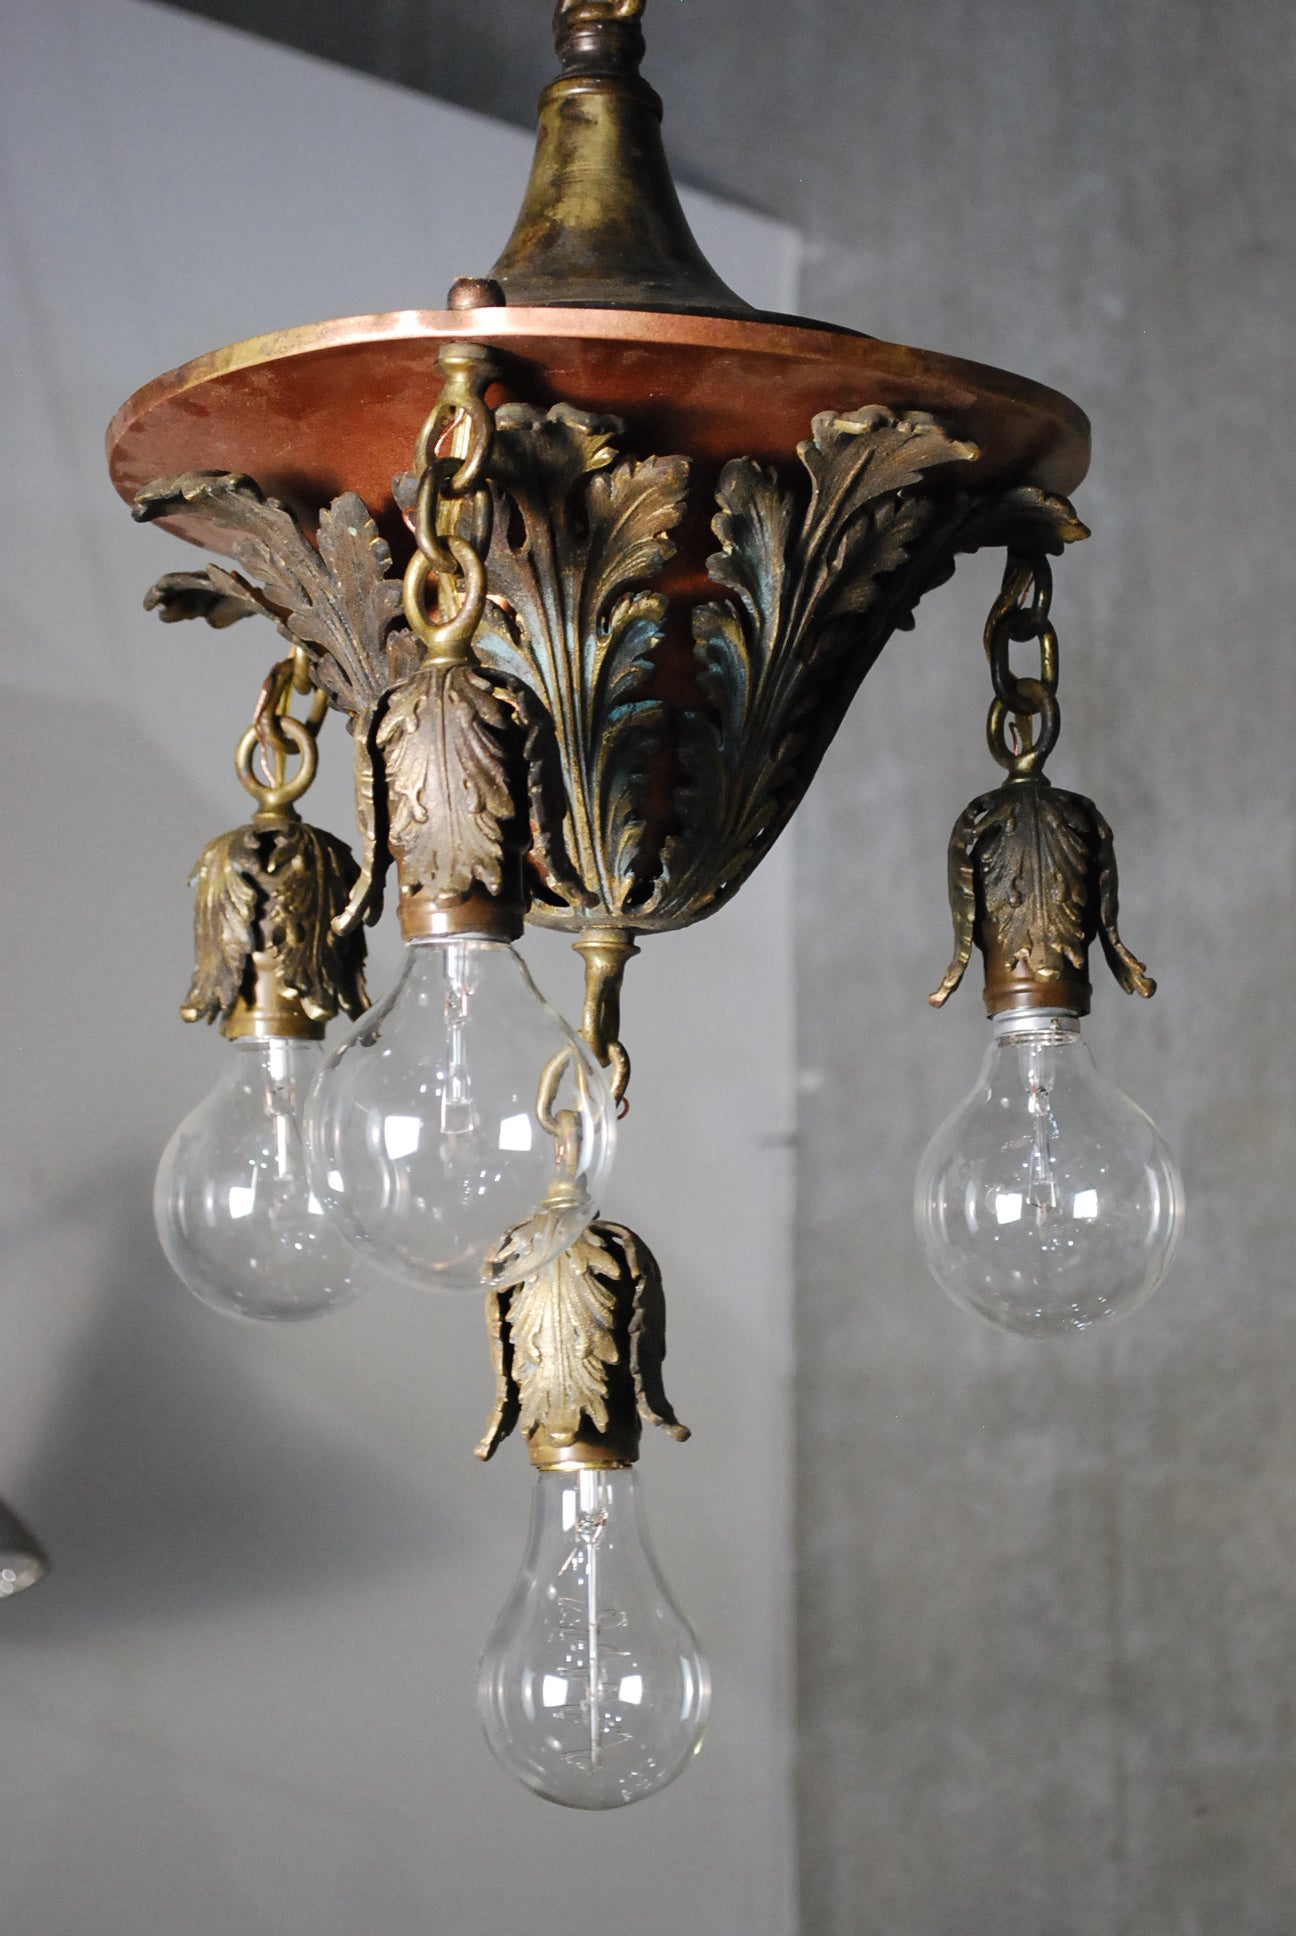 1910 Copper and brass Victorian Chandelier | Scott Landon Antiques and Interiors.